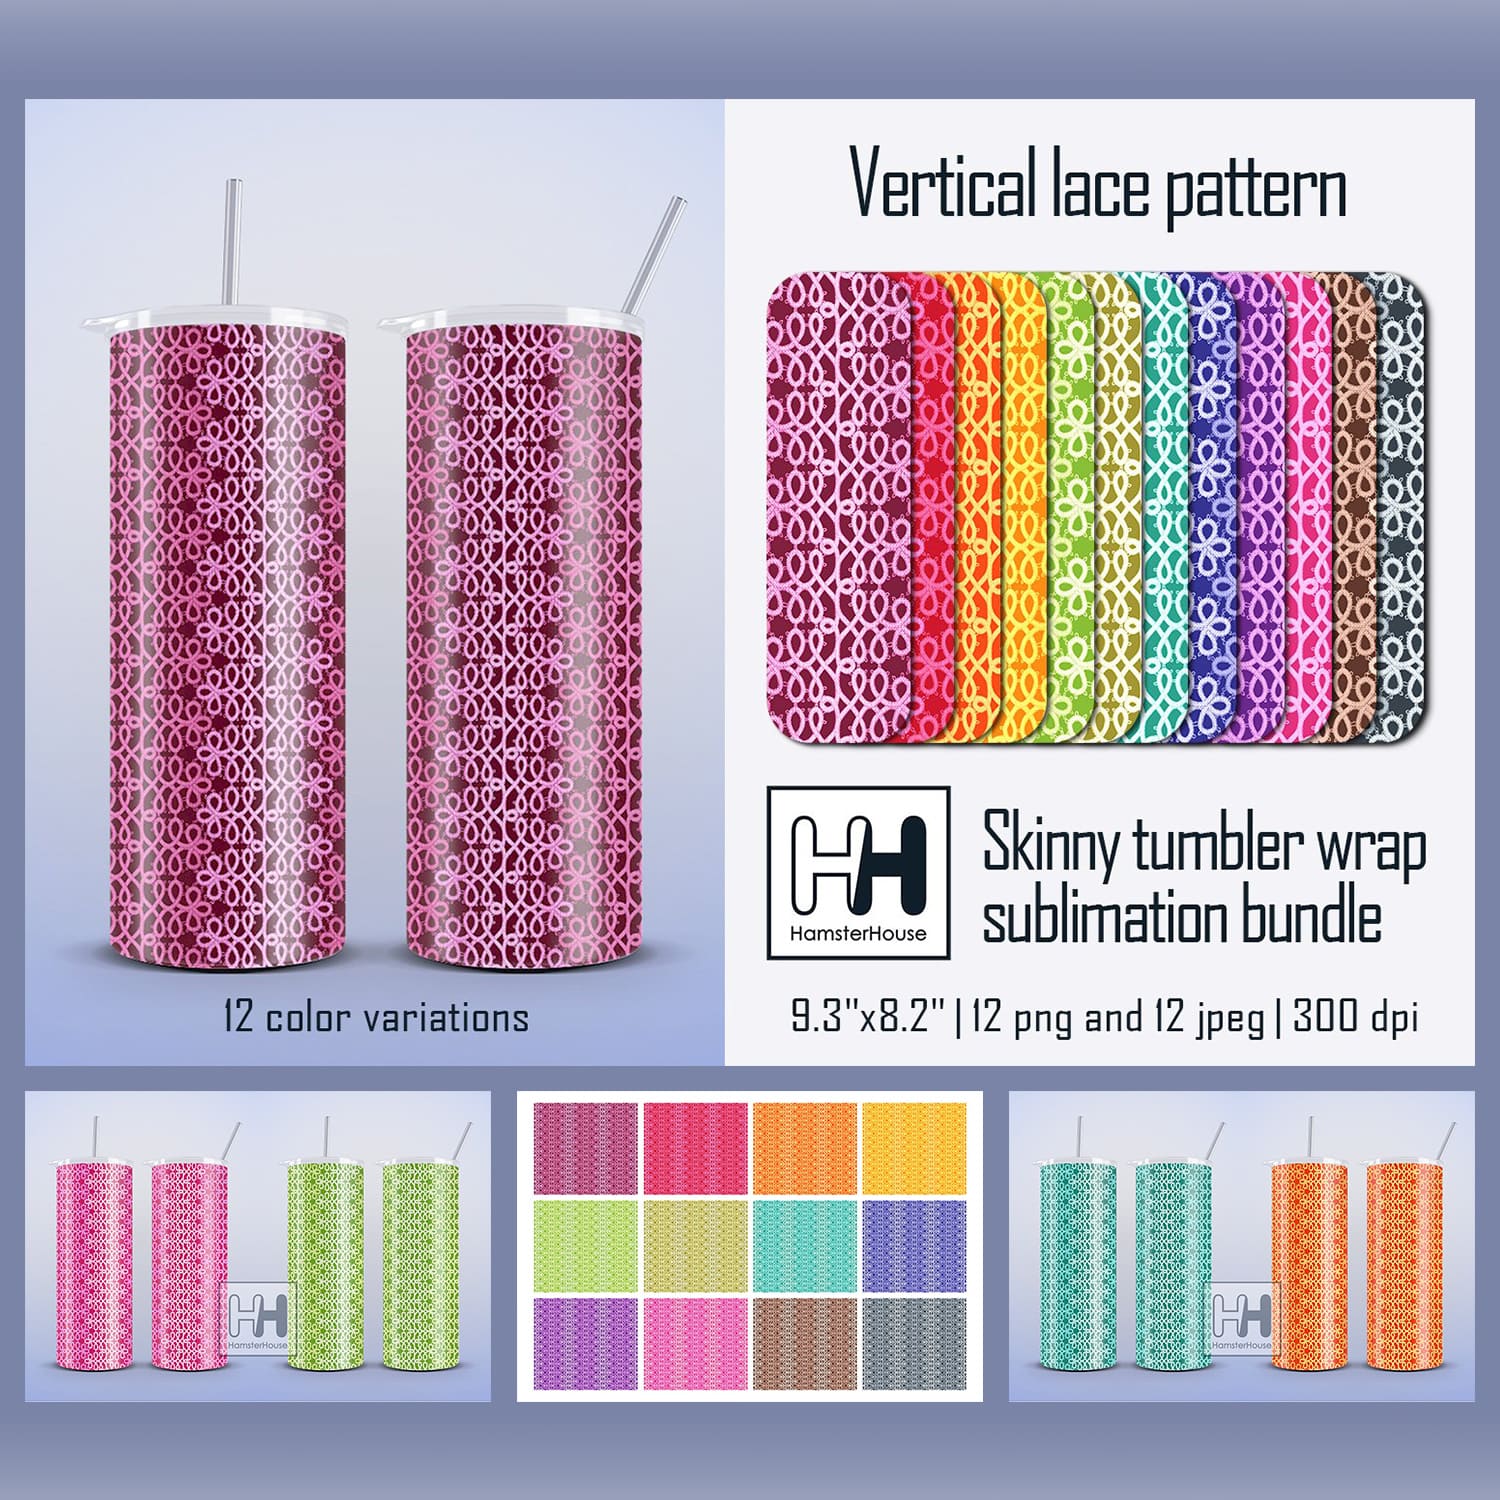 Vertical Lace Pattern Skinny Tumbler Wrap Sublimation.